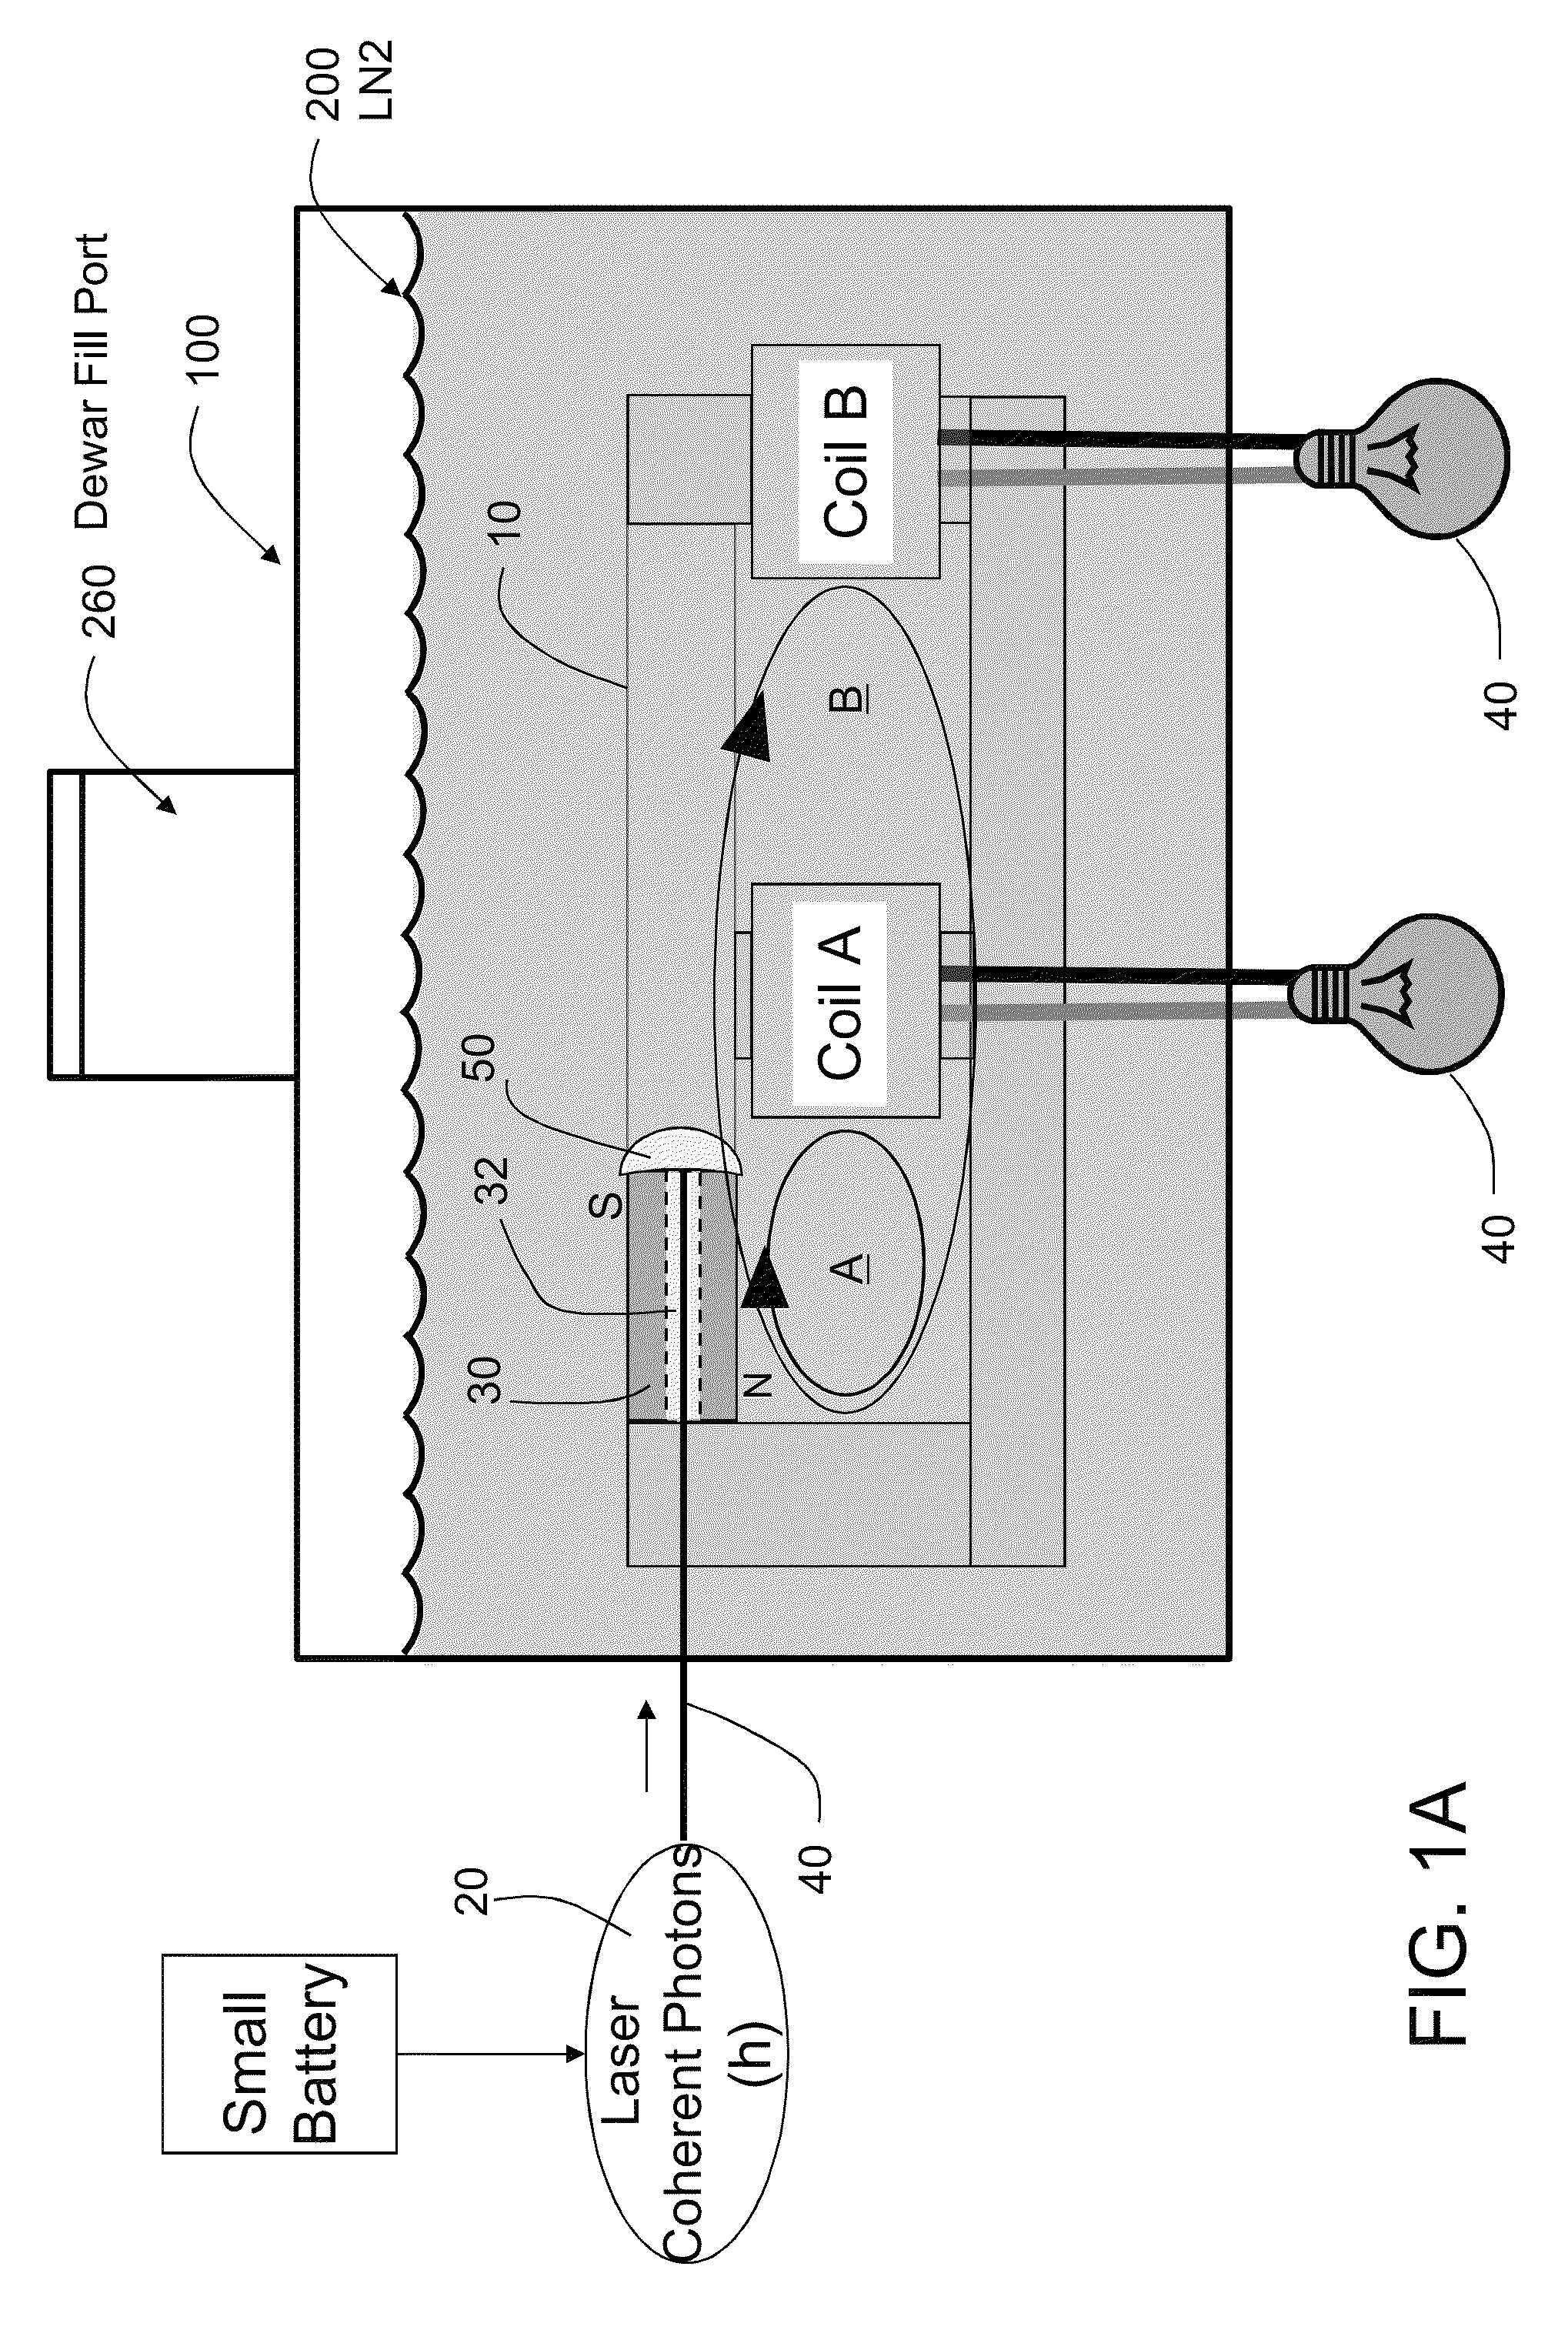 Method and apparatus for direct energy conversion